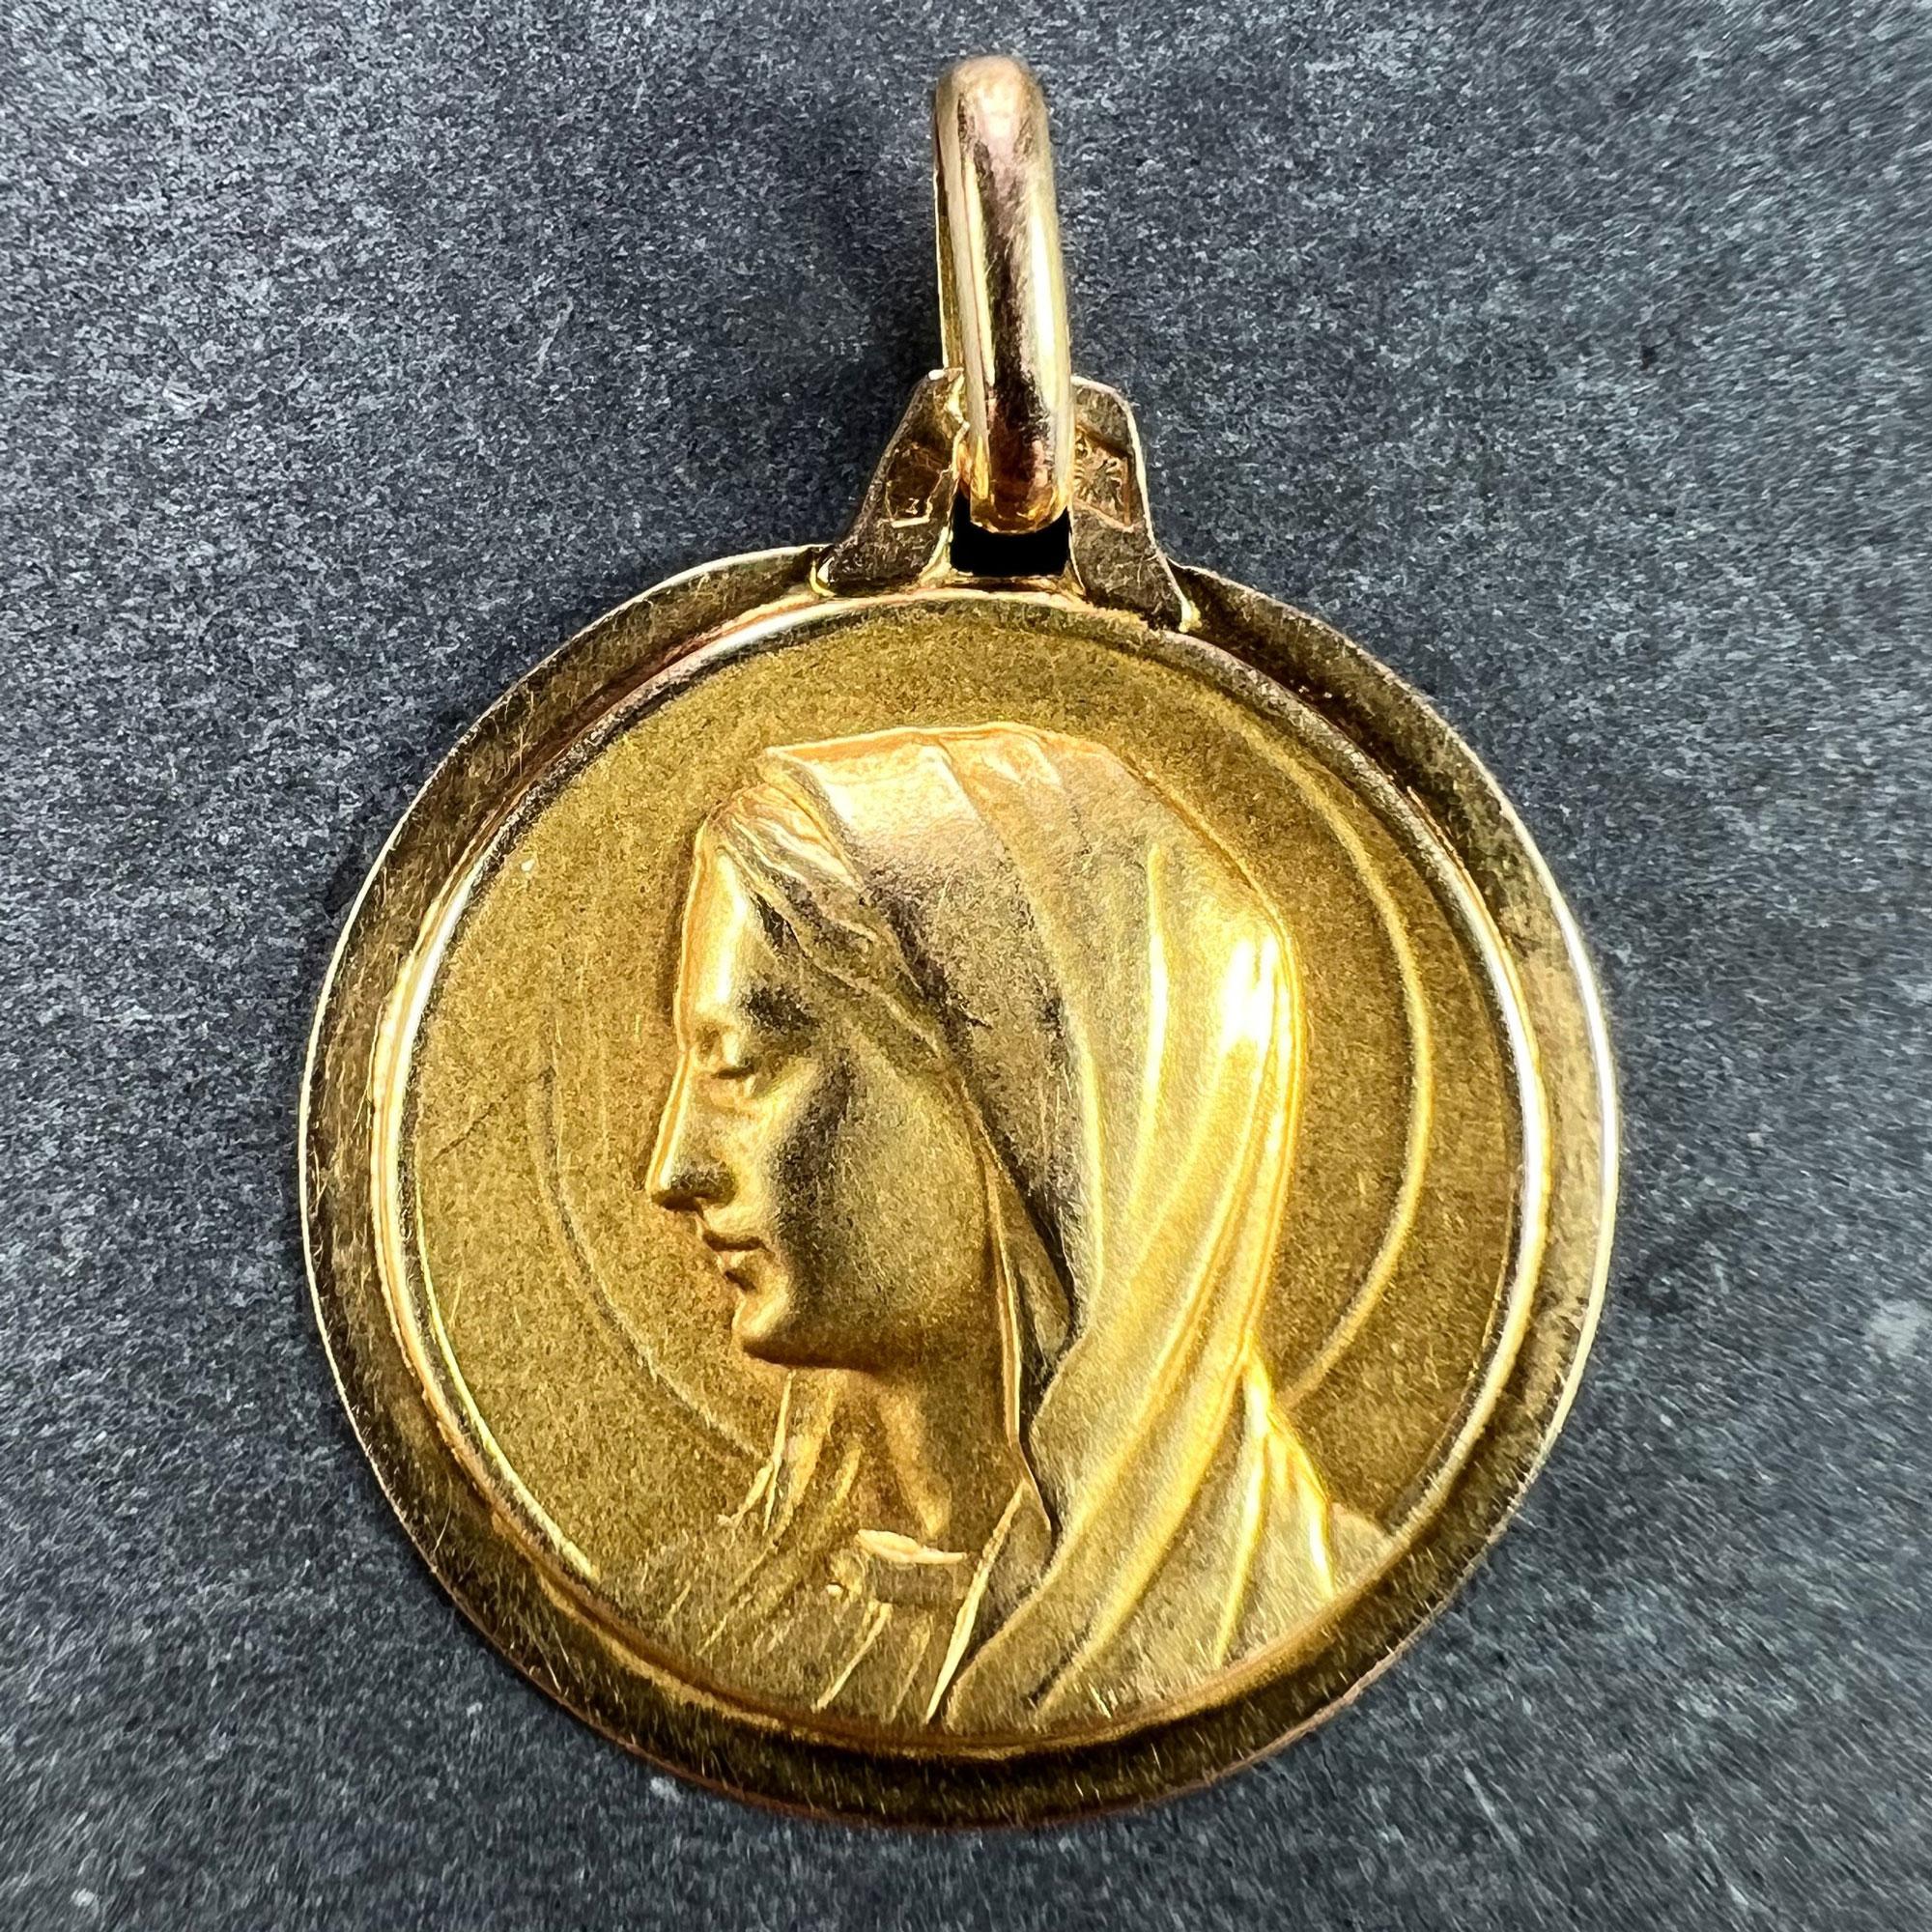 An 18 karat (18K) yellow gold pendant designed as a round medal depicting the Virgin Mary with a halo. Stamped with French marks for 18 karat gold with an unknown maker's mark.

Dimensions: 2.1 x 1.8 x 0.13 cm (not including jump ring)
Weight: 1.41